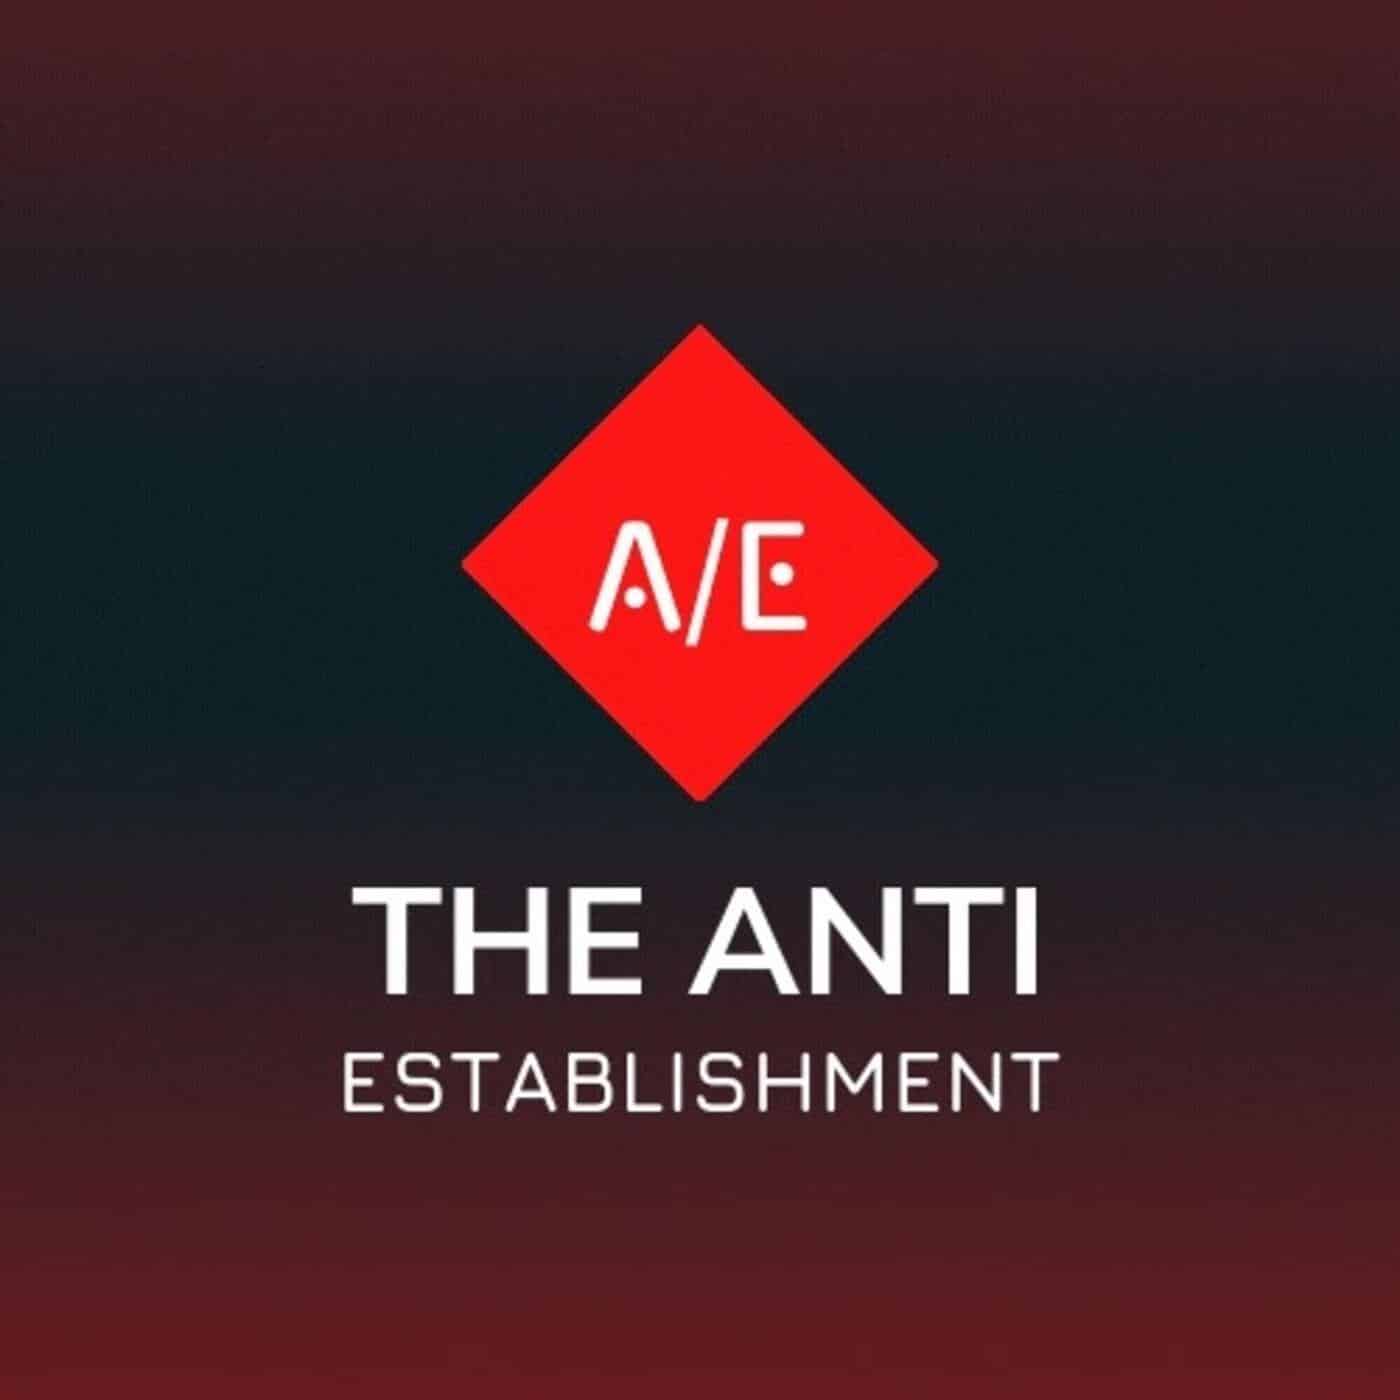 Episode 677: A Message To Conservative/Right Allies w/ David of The Anti Establishment Podcast